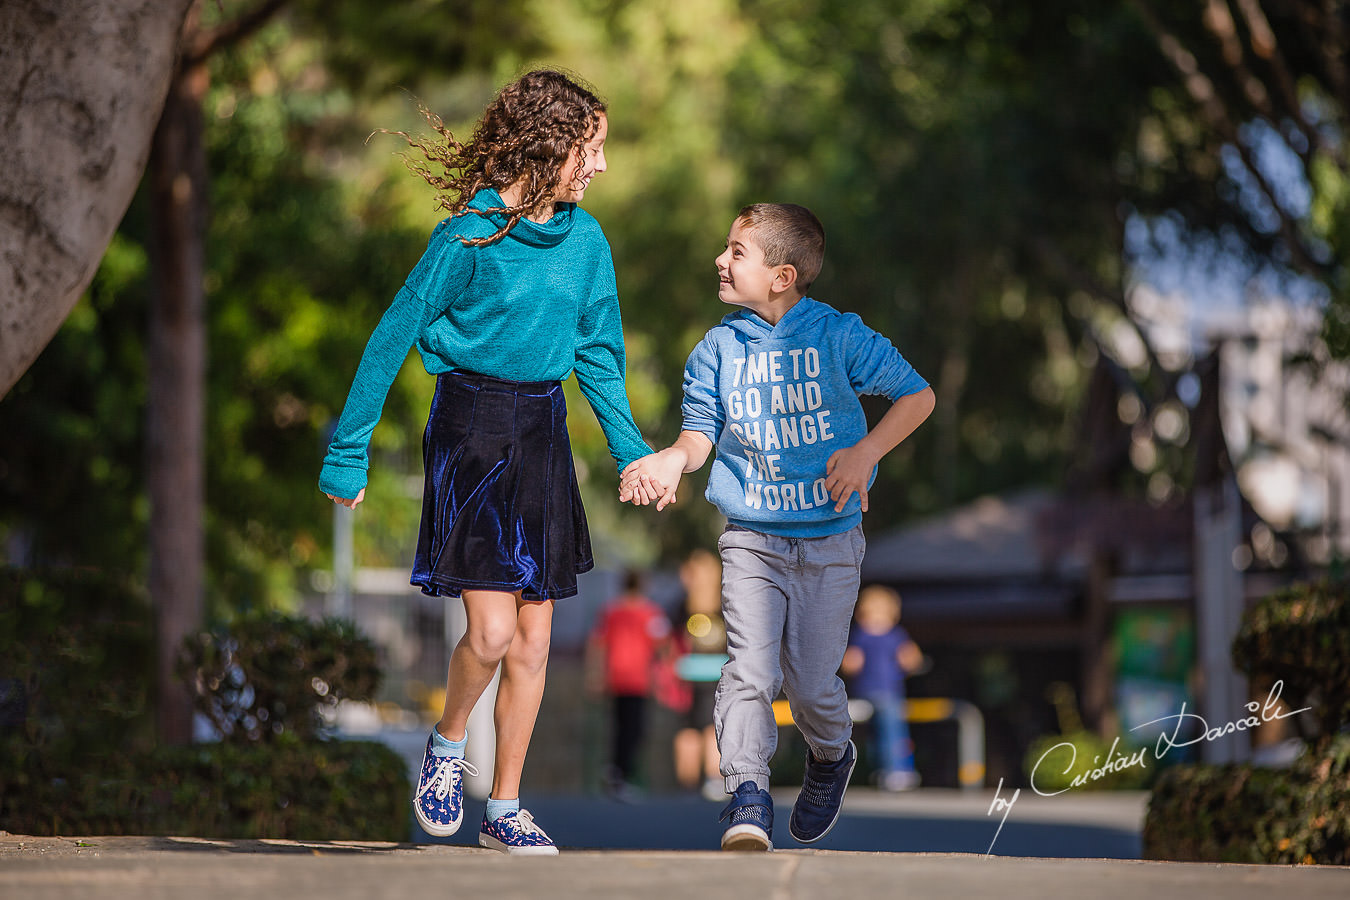 Young brother and sister running in the park, moments captured by Cristian Dascalu during a beautiful Limassol family photography photo session.